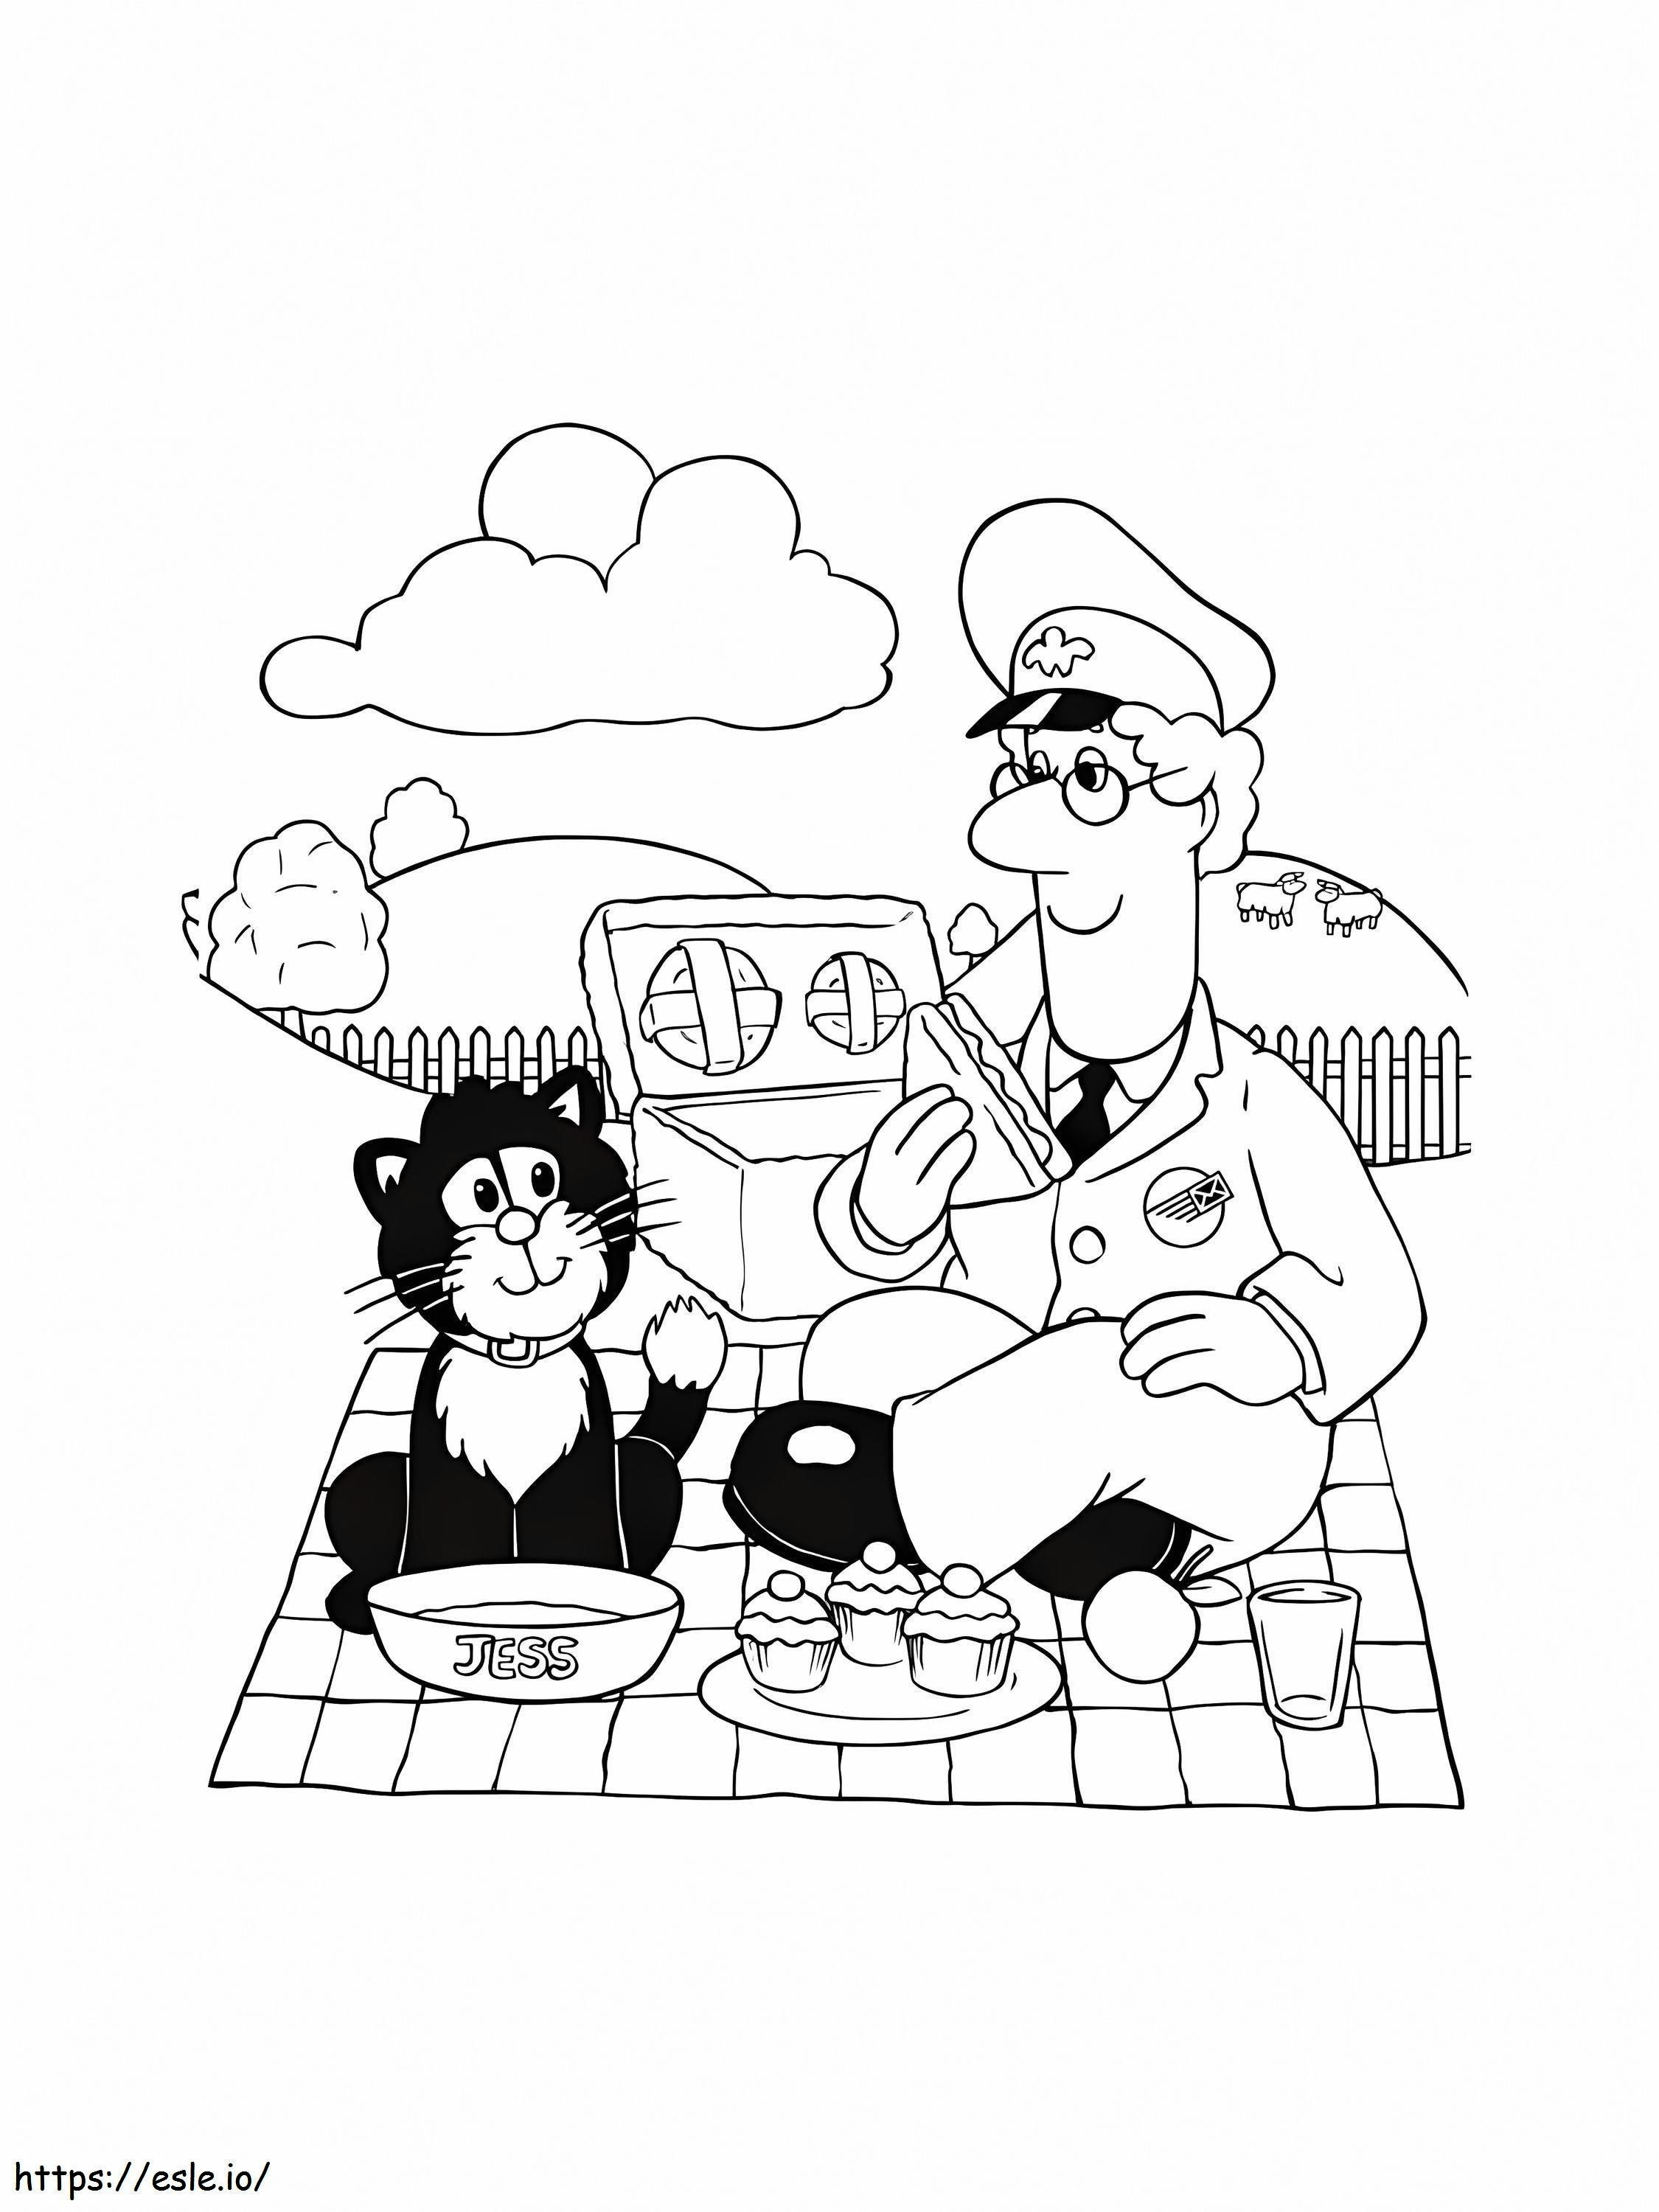 Postman And Sitting Cat coloring page